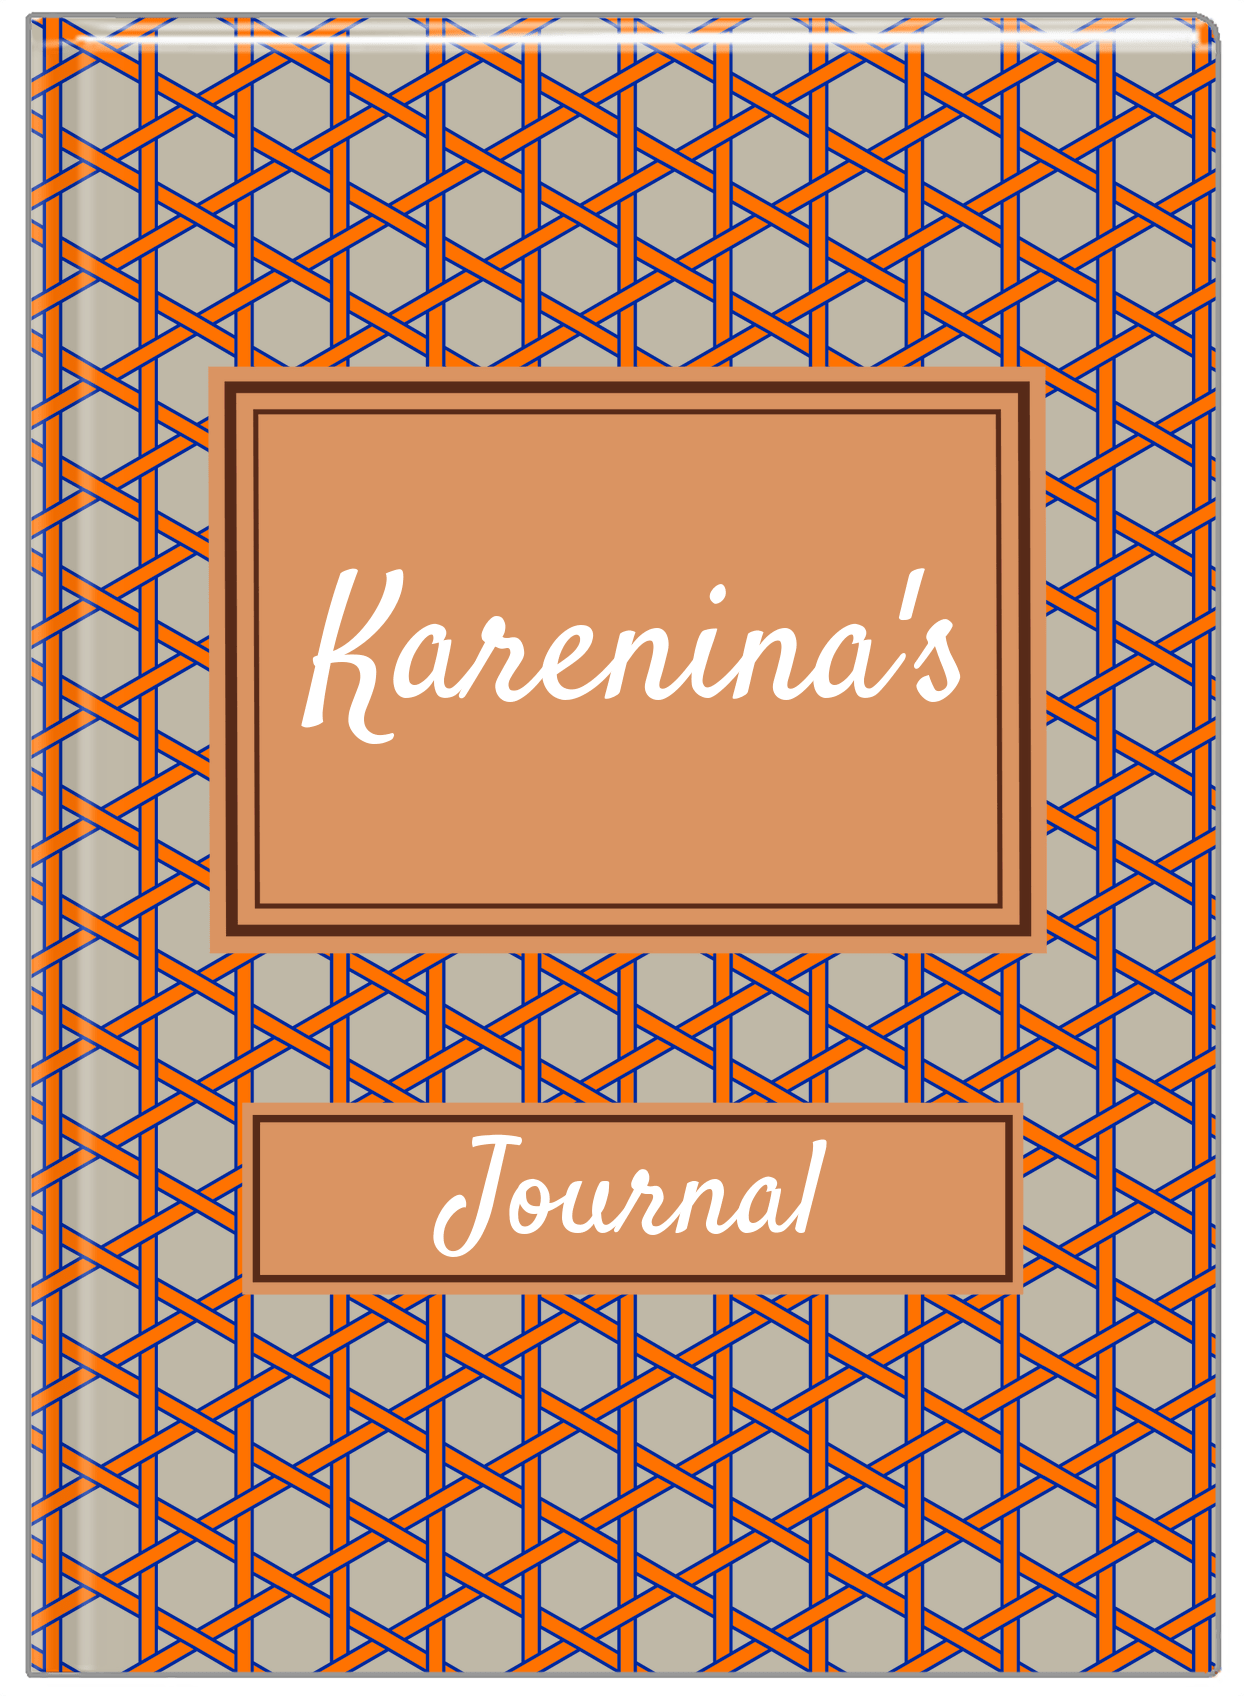 Personalized Trellis I Journal - Orange and Tan - Rectangle Nameplate - Front View